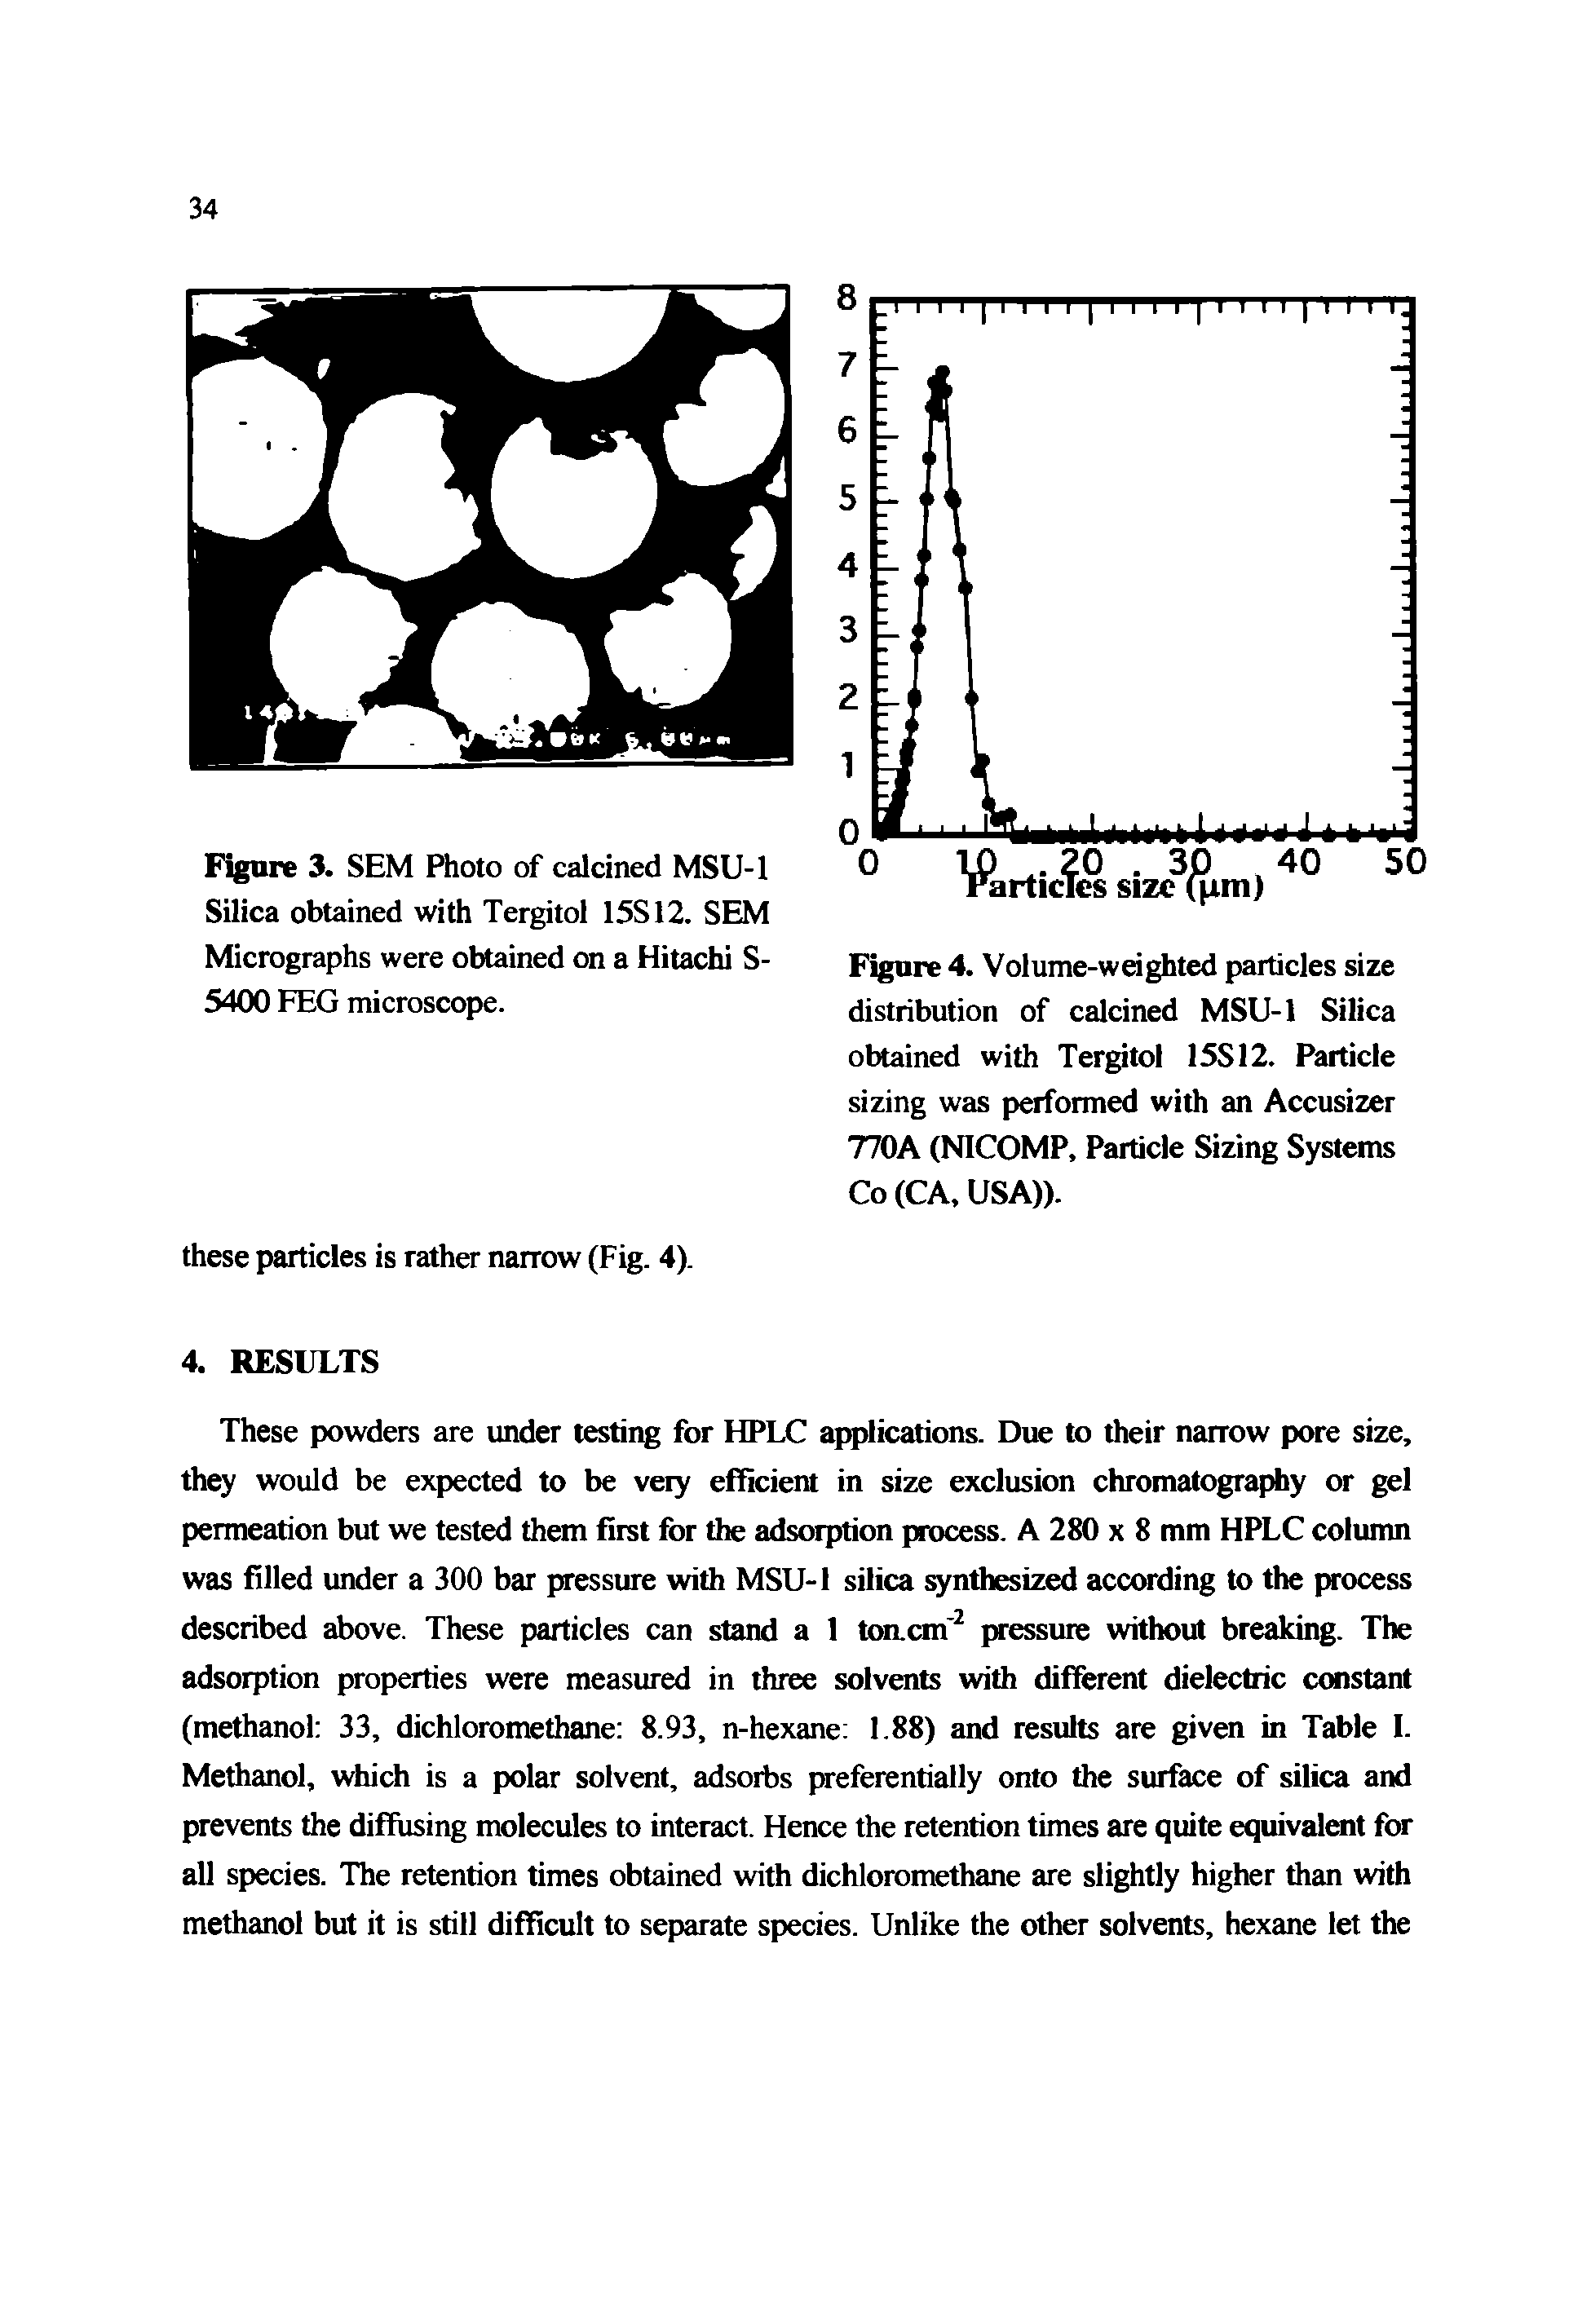 Figure 4. Volume-weighted particles size distribution of calcined MSU-1 Silica obtained with Tergitol 15S12. Particle sizing was performed with an Accusizer 770A (NICOMP, Particle Sizing Systems Co (CA, USA)).